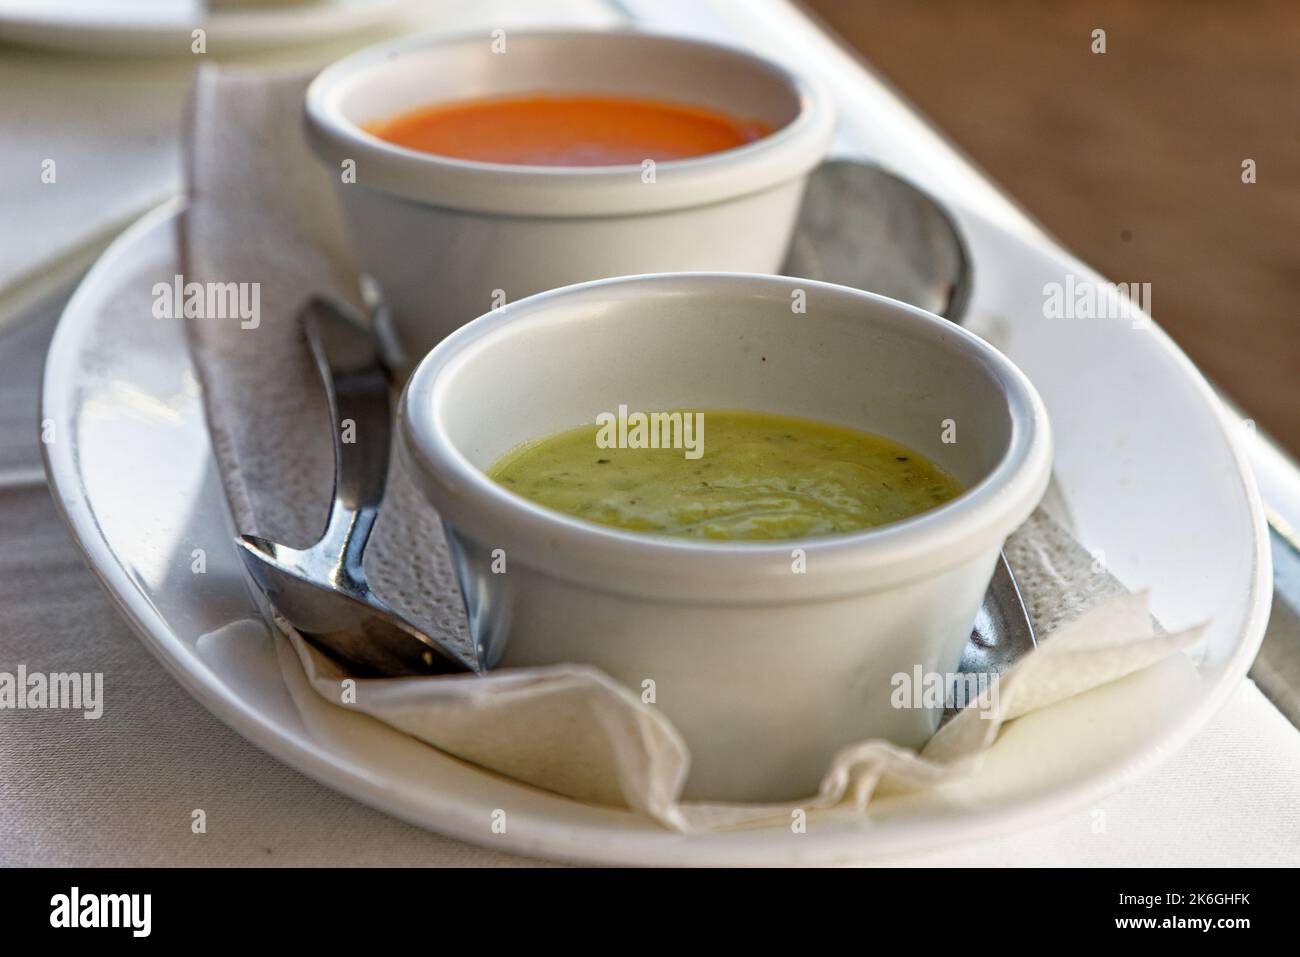 Traditional Spanish food mojo rojo and mojo verde - Typical red and green mojo dips to accompany food in Tenerife, Canary Islands, Spain Stock Photo